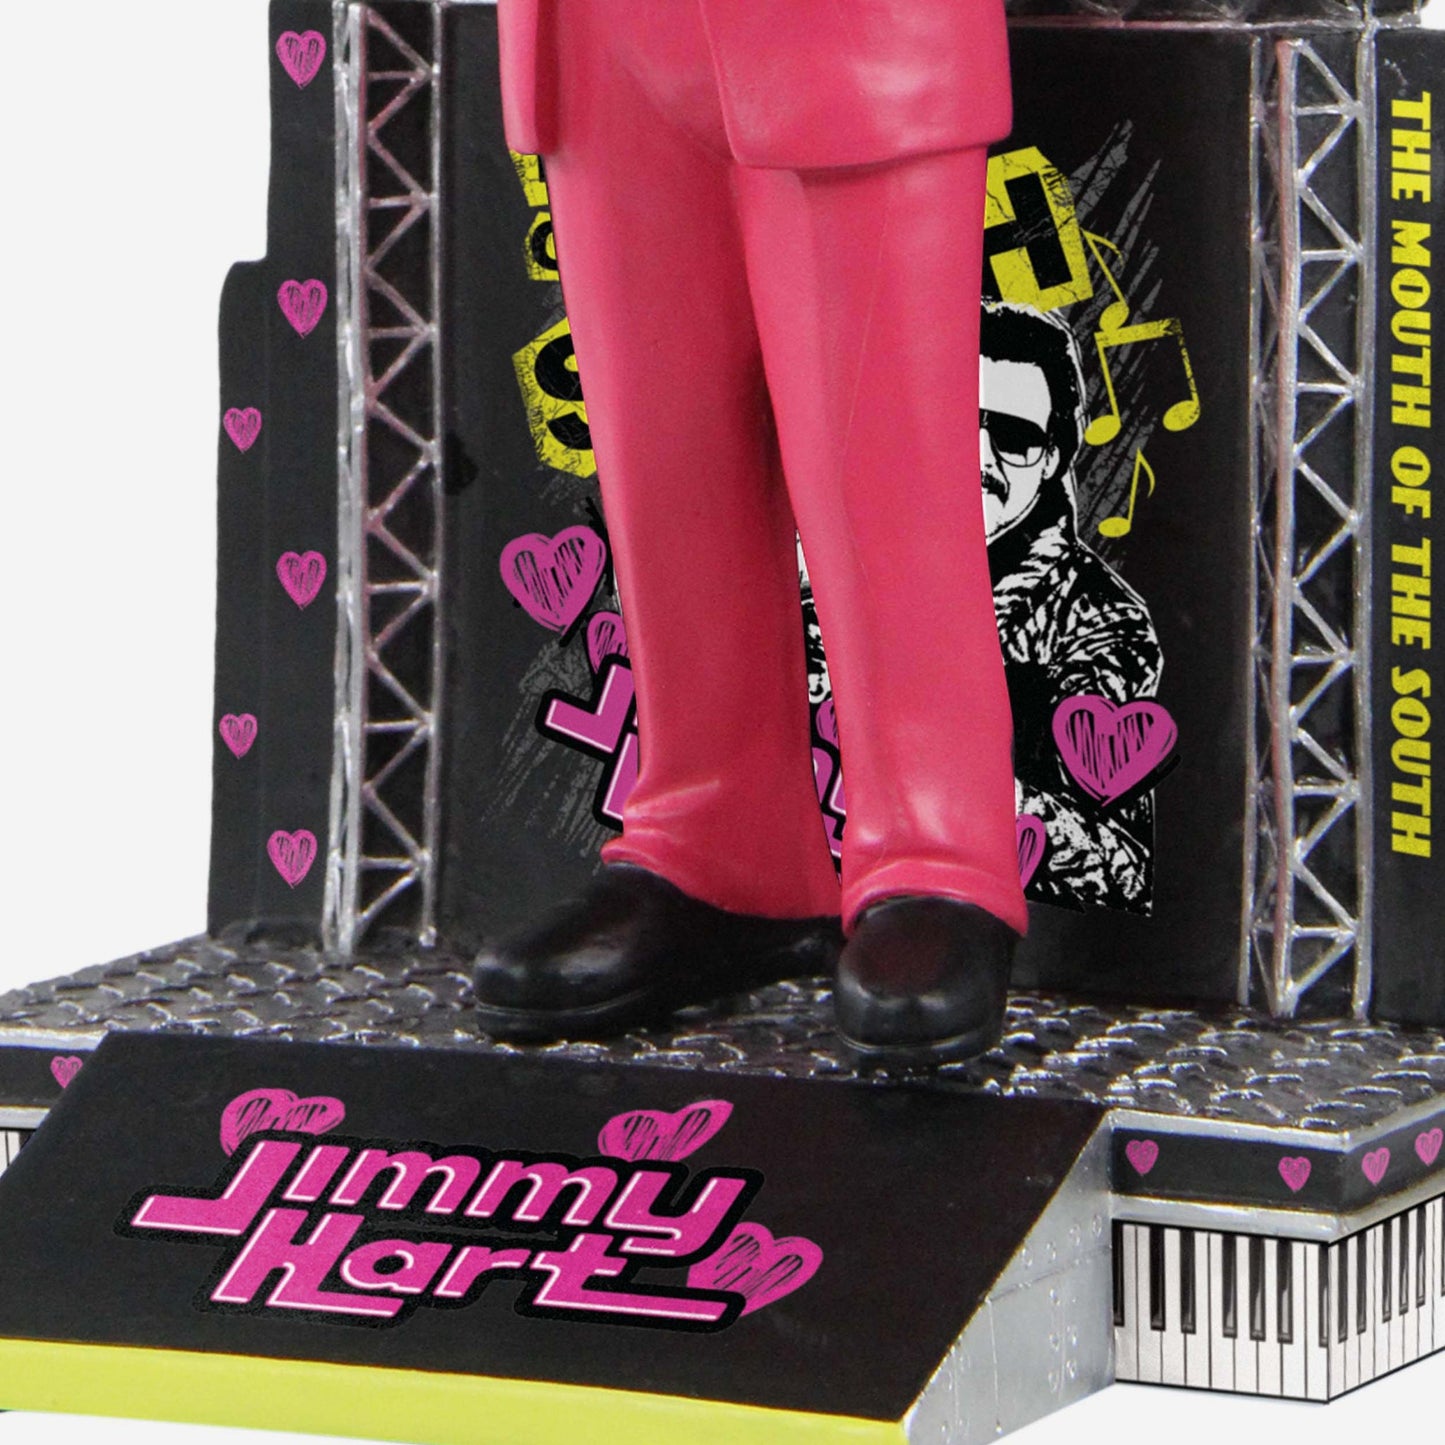 2023 WWE FOCO Bobbleheads Limited Edition "The Mouth of the South" Jimmy Hart